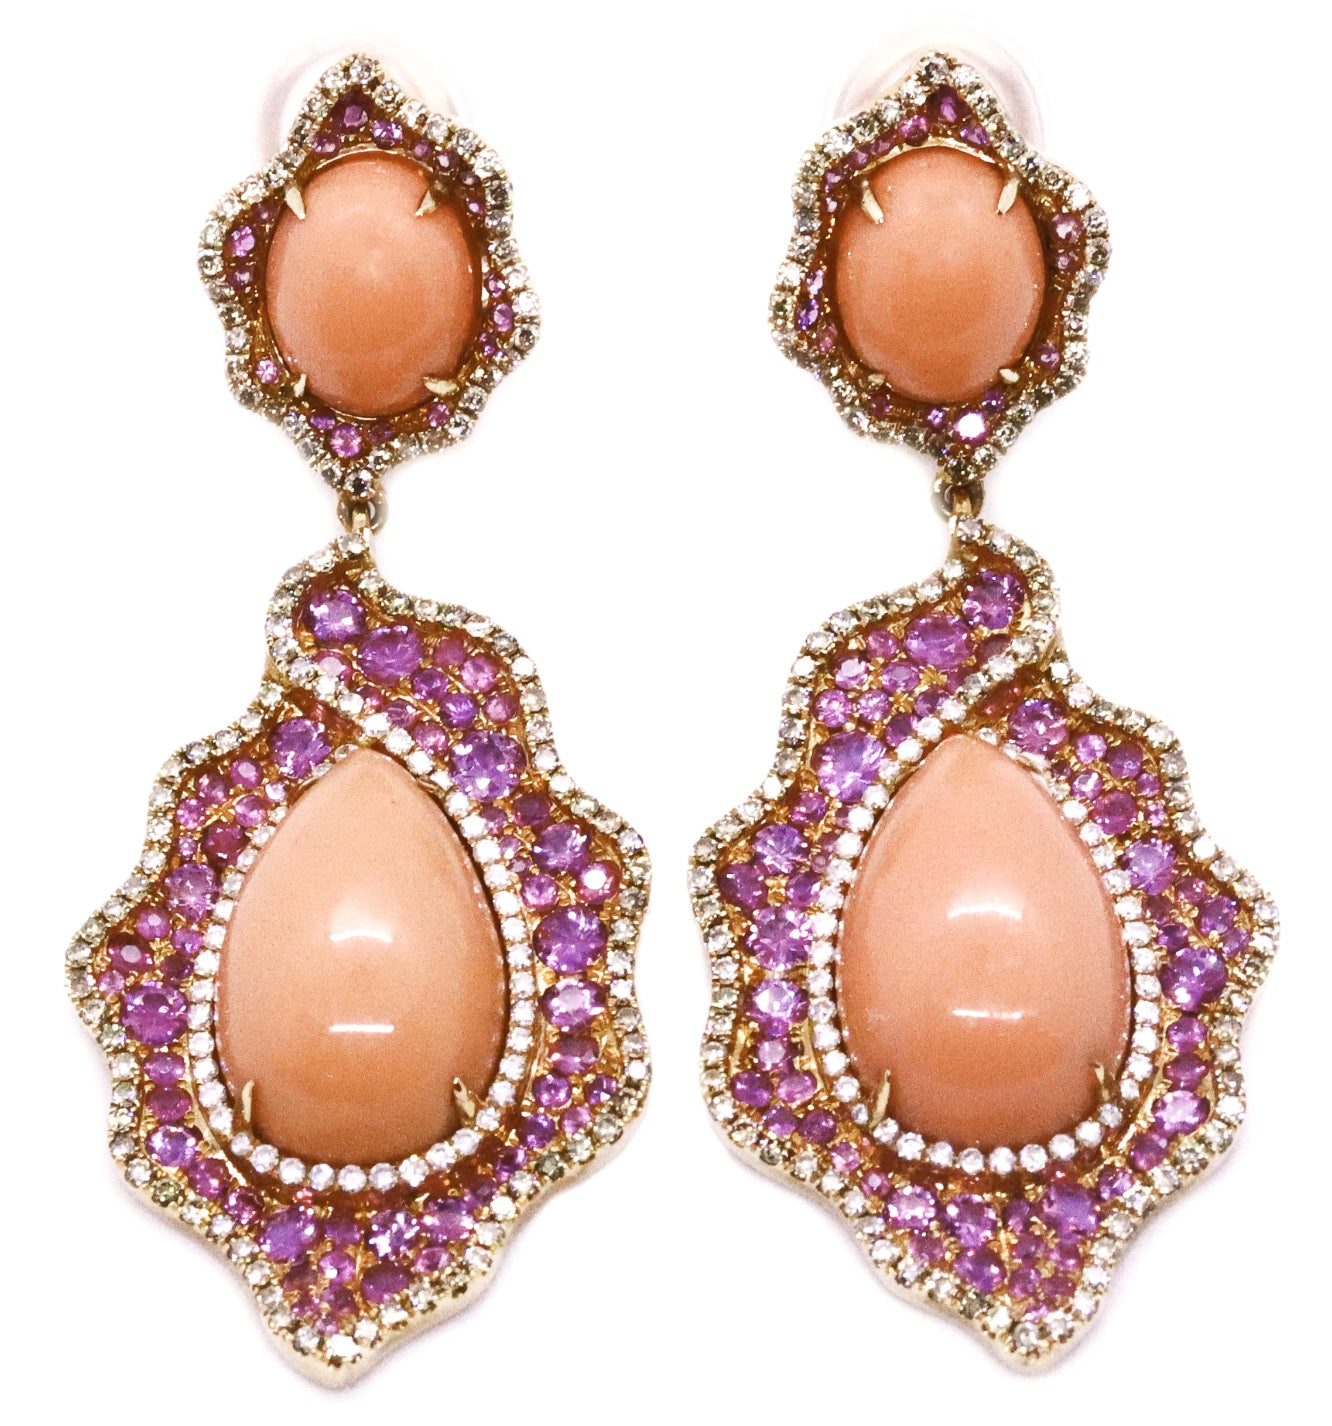 ASCOLI PICENO CORAL DROPS 18 KT EARRINGS WITH 10.56 Cts DIAMONDS & RUBIES